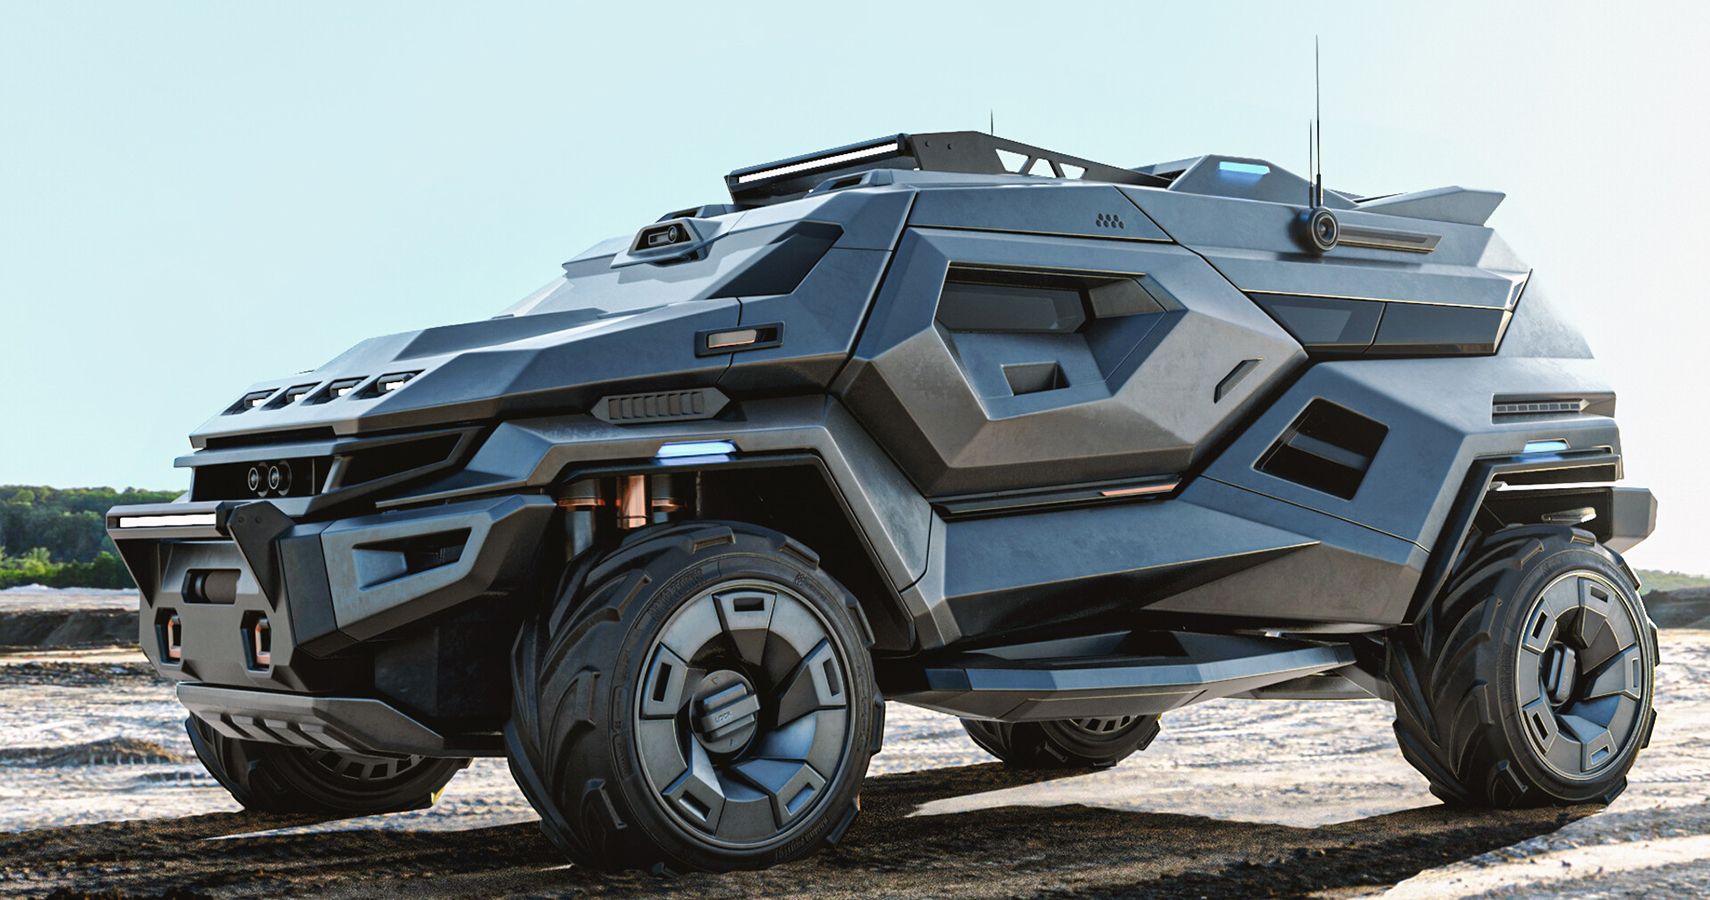 Check Out This Wild Armortruck SUV Concept